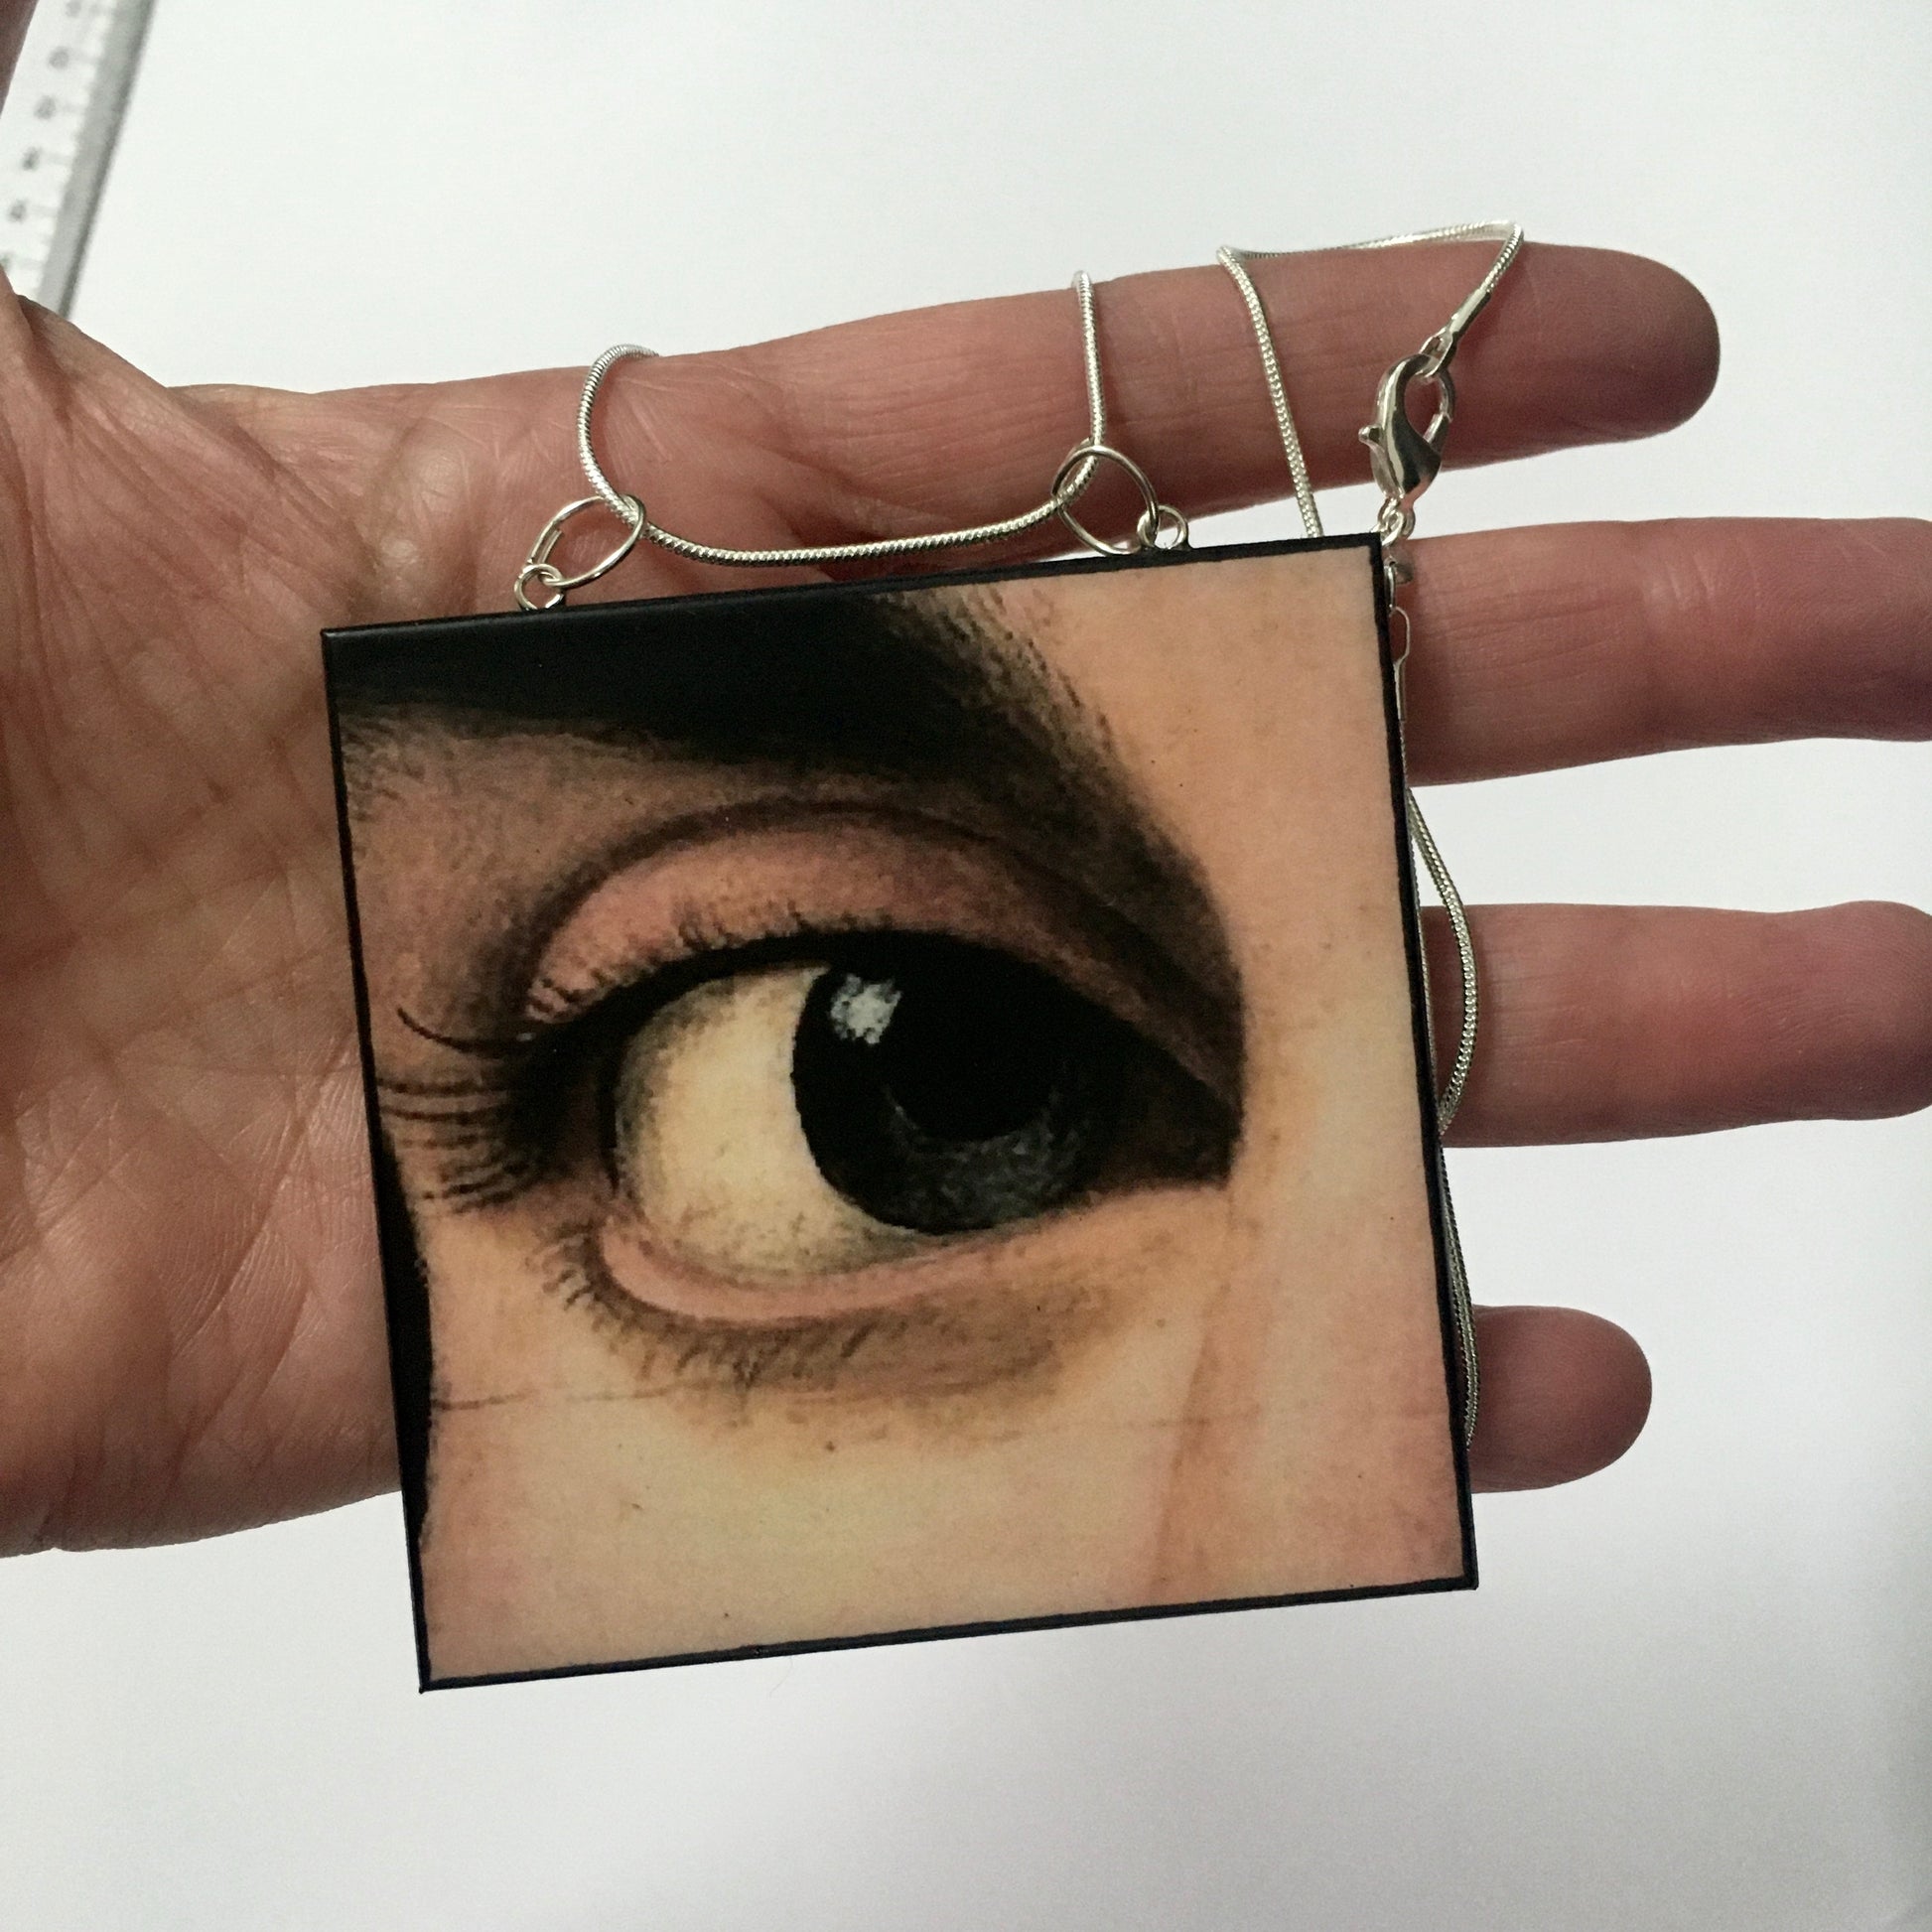 hand holding a Sustainable wood pendant with an eye detail taken from a Renaissance art painting by Antonello da Messina. Handmade by Obljewellery